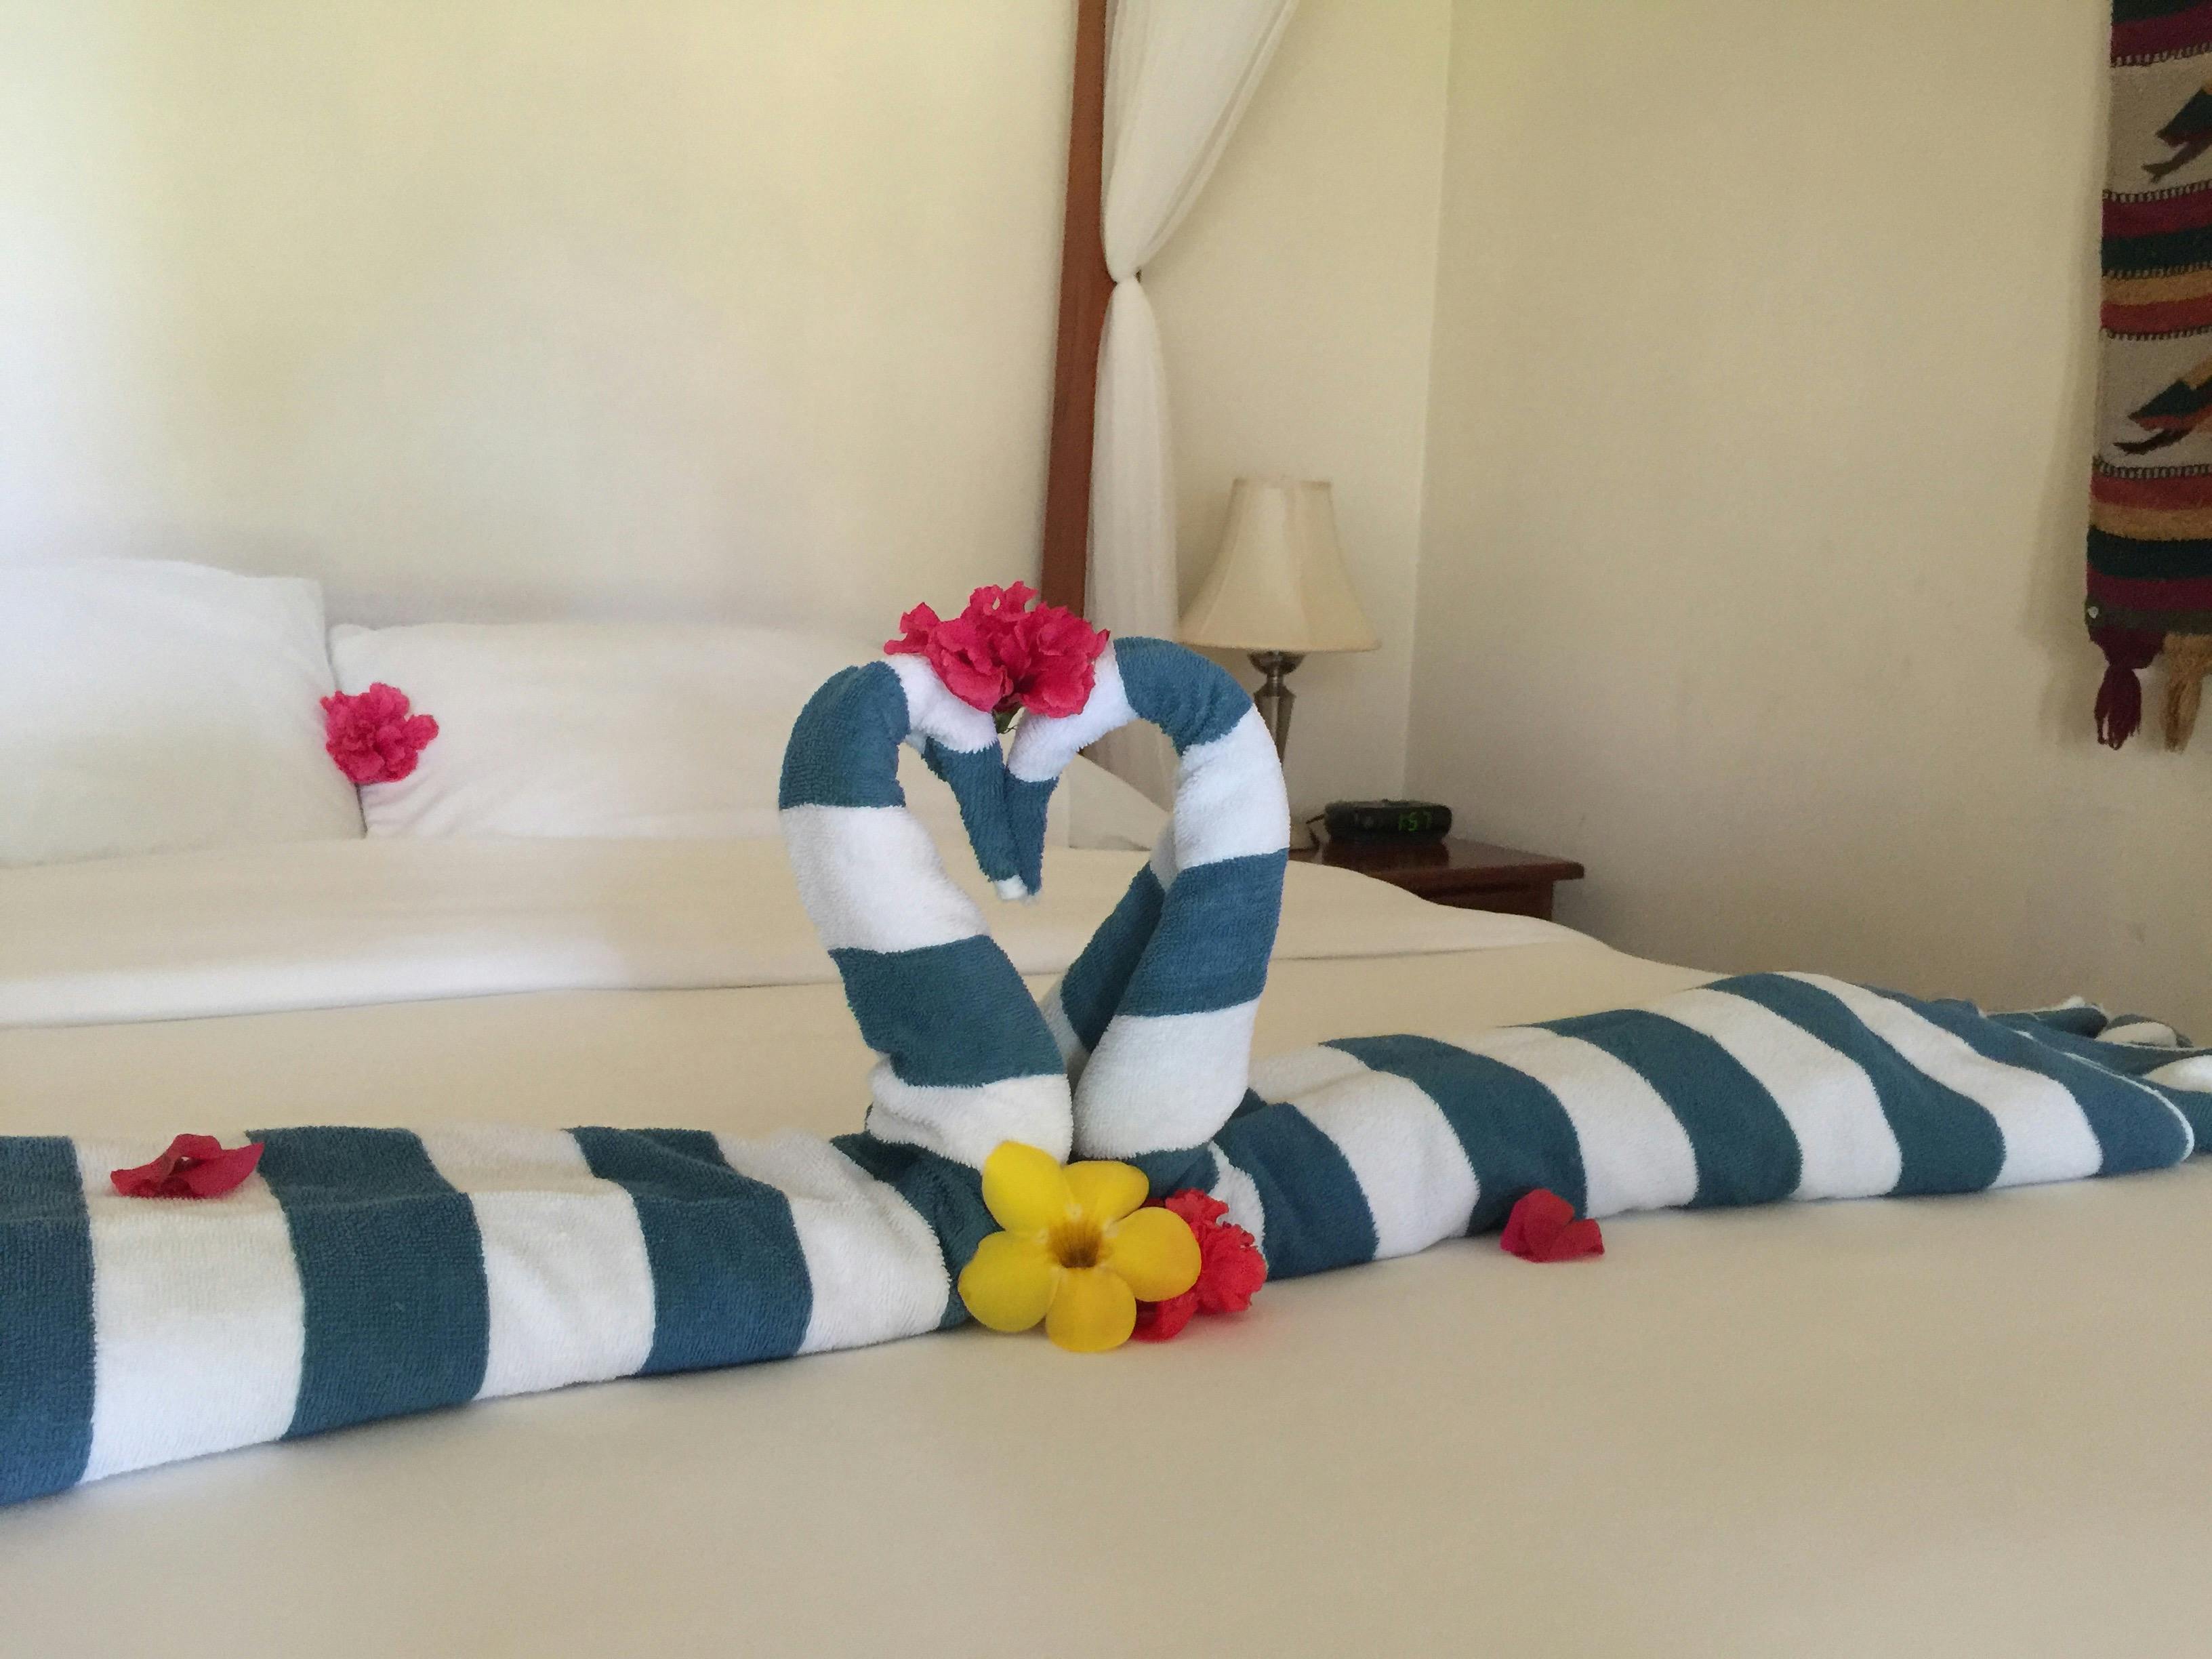 Towel animals on beds